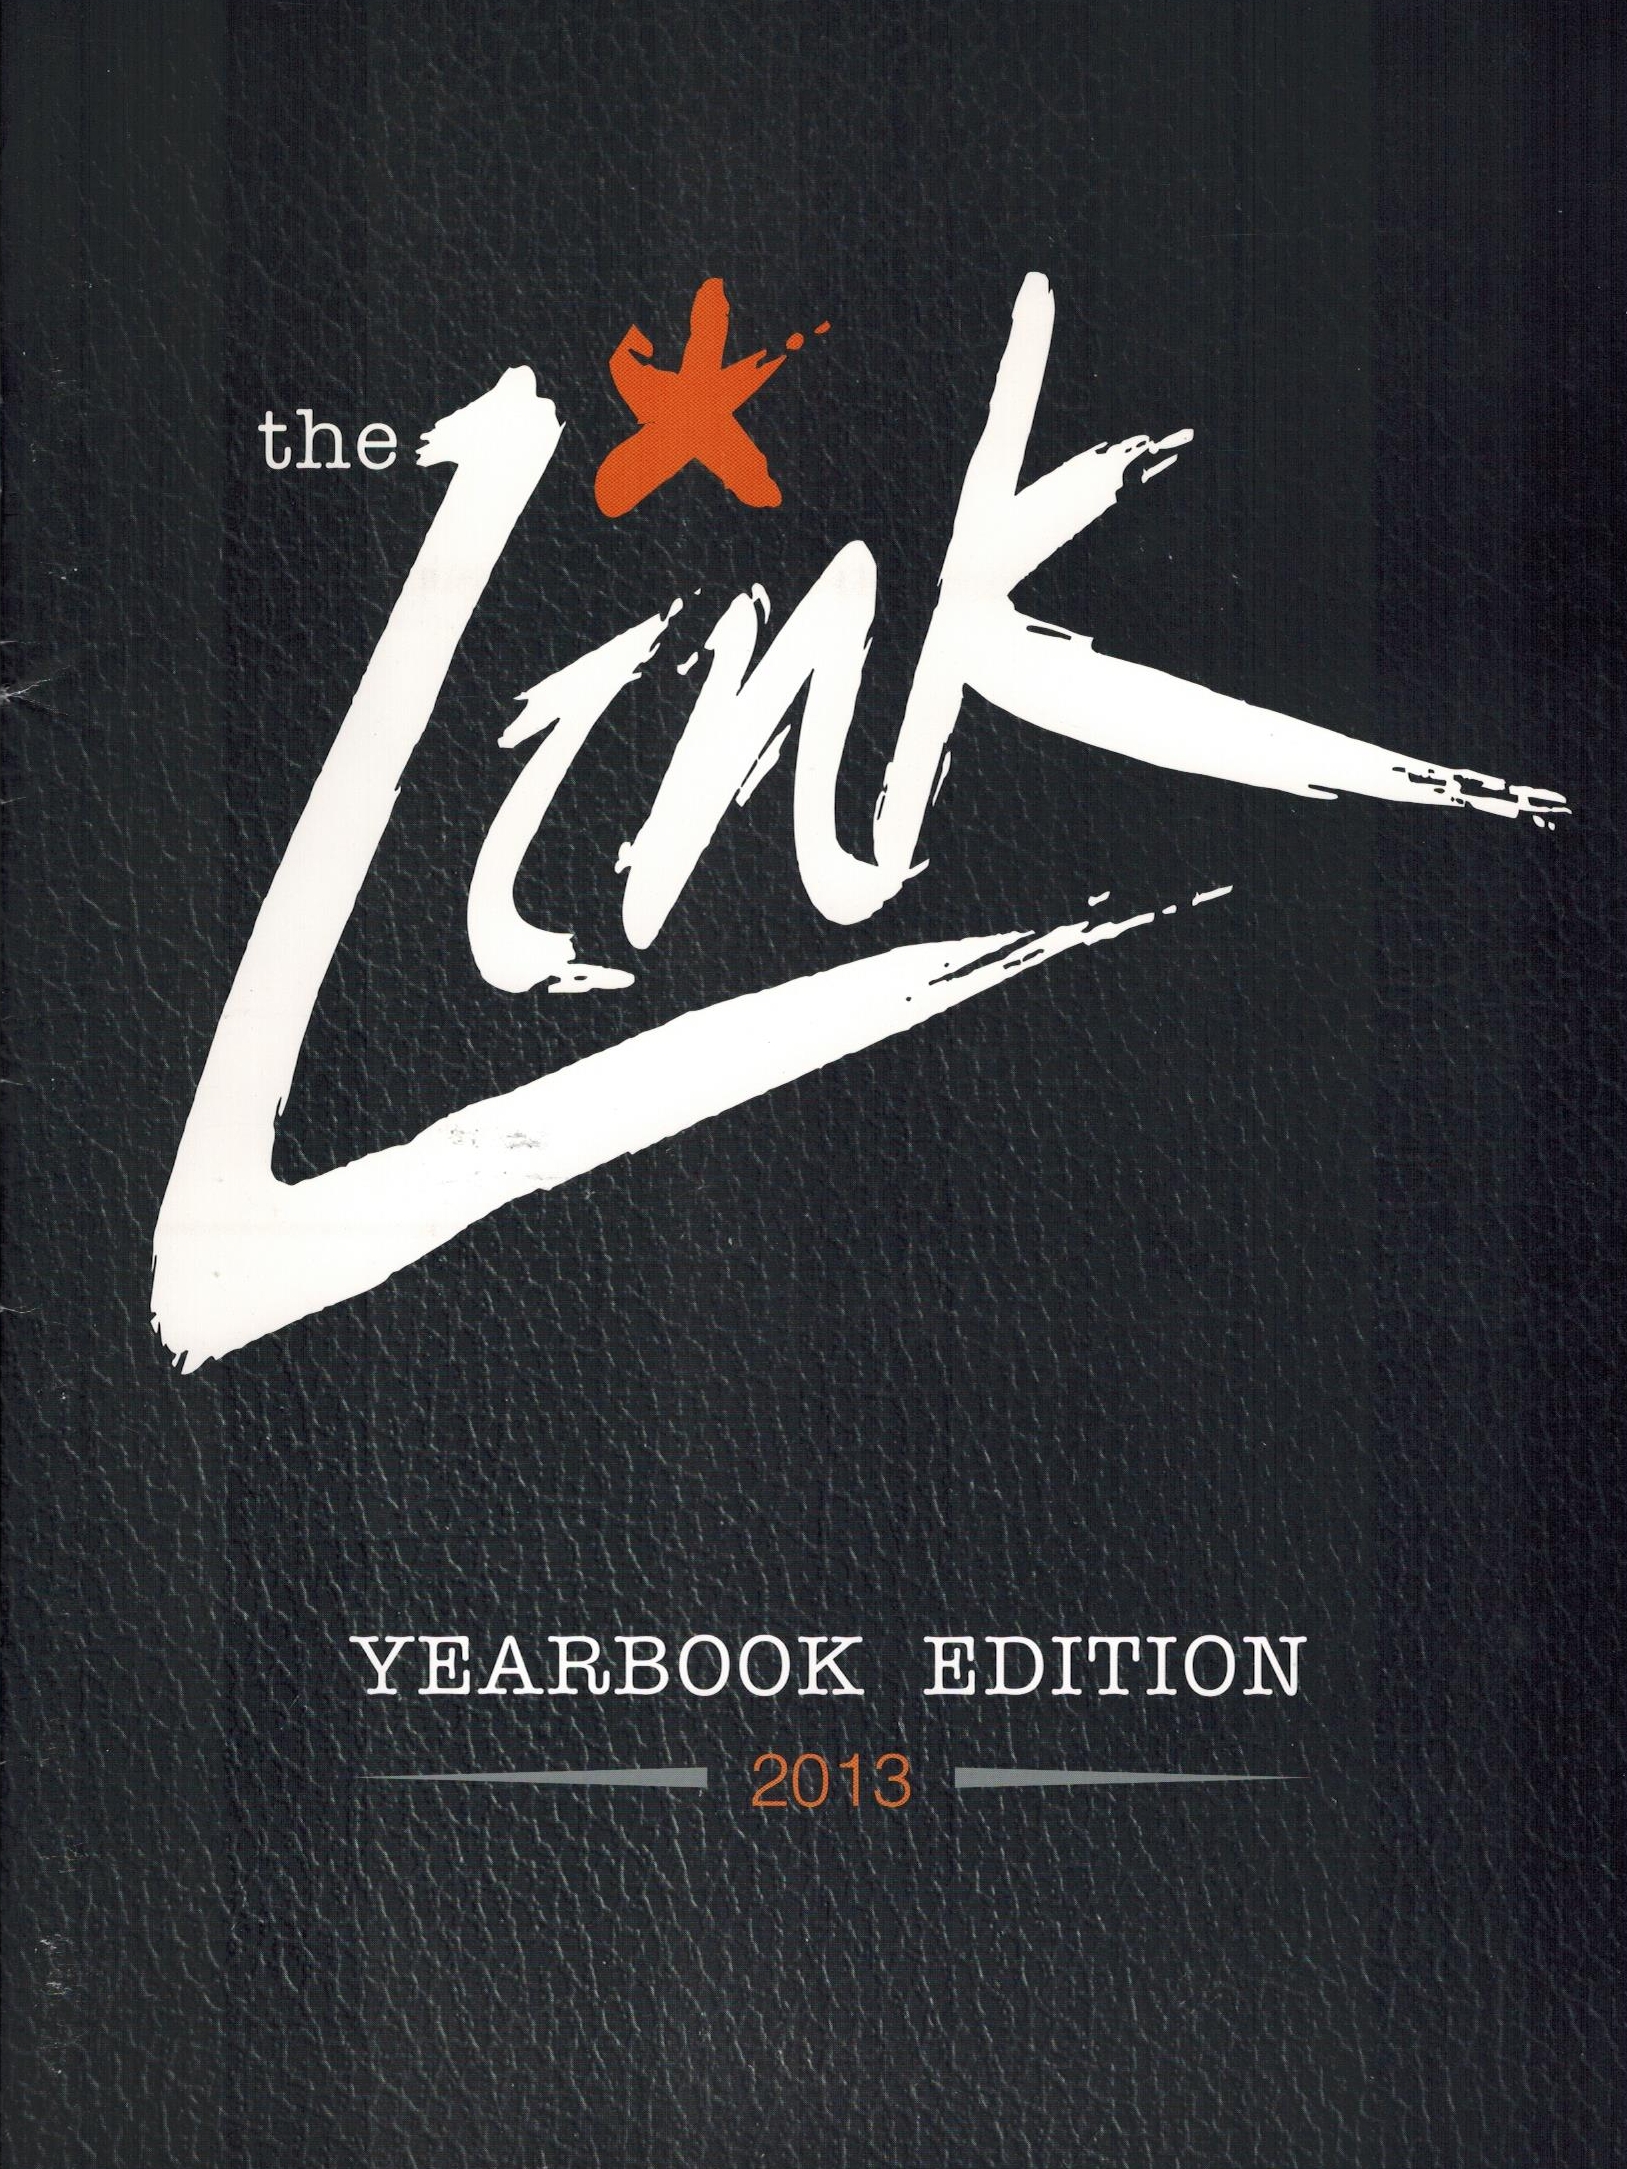 The Link, 2013 Yearbook